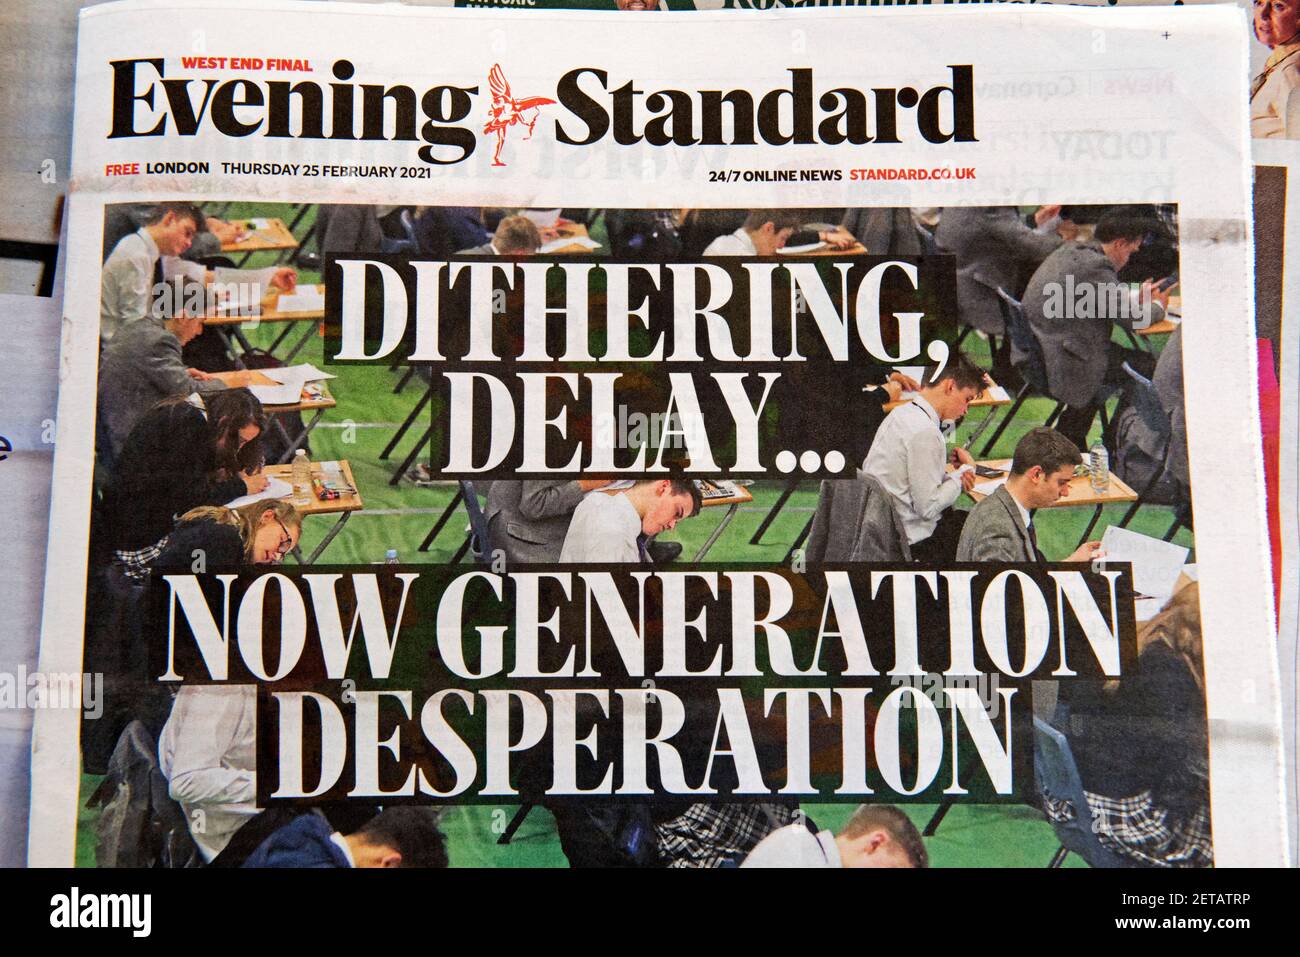 Evening Standard Headline - Dithering Delay...Now Generation Desperation - about school exams during Coronovirus pandemic Covid-19 Thursday 25 February Stock Photo